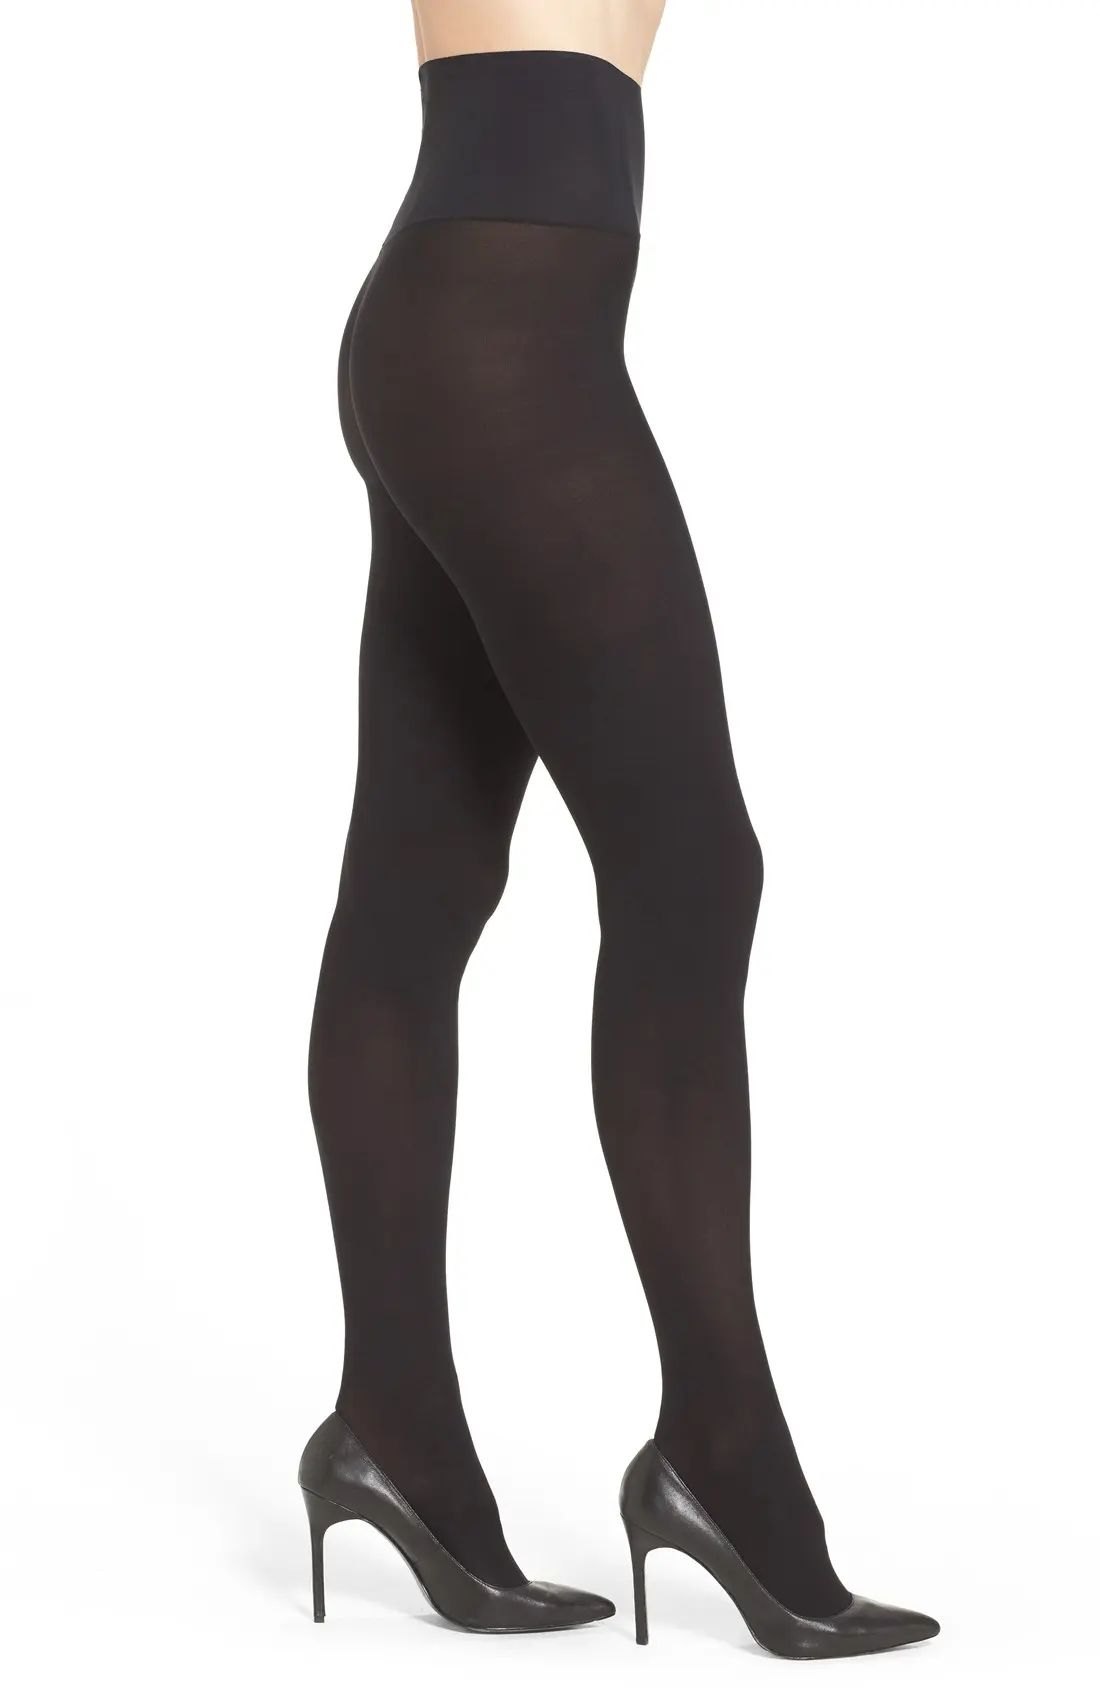 Commando Ultimate Opaque Matte Tights in Black at Nordstrom, Size Small | Nordstrom